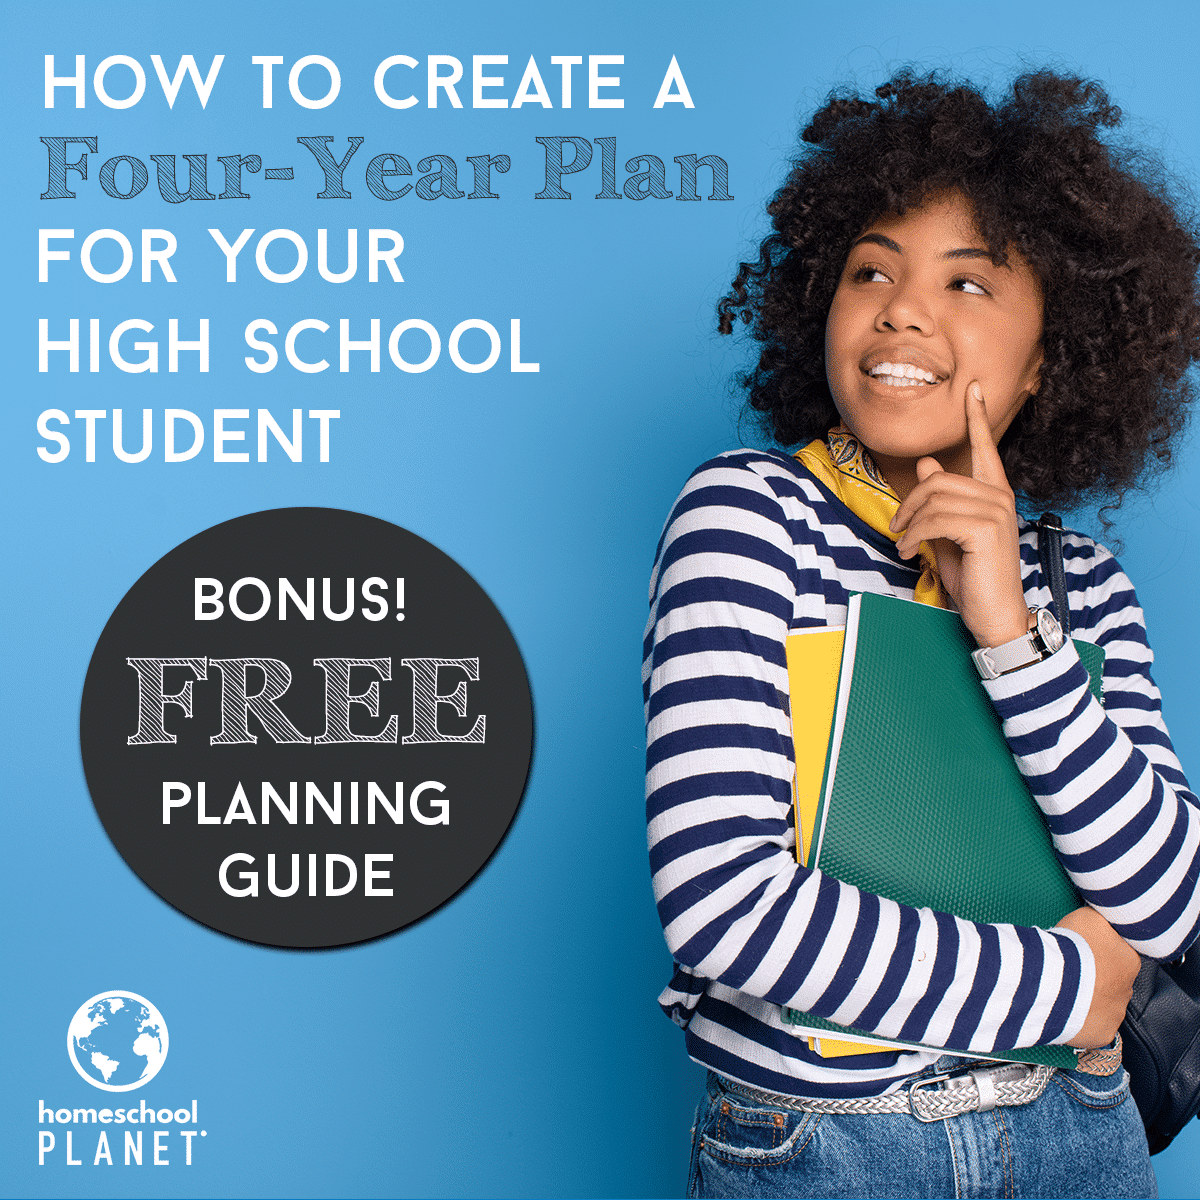 How to Create a 4-Year High School Plan for Your Student